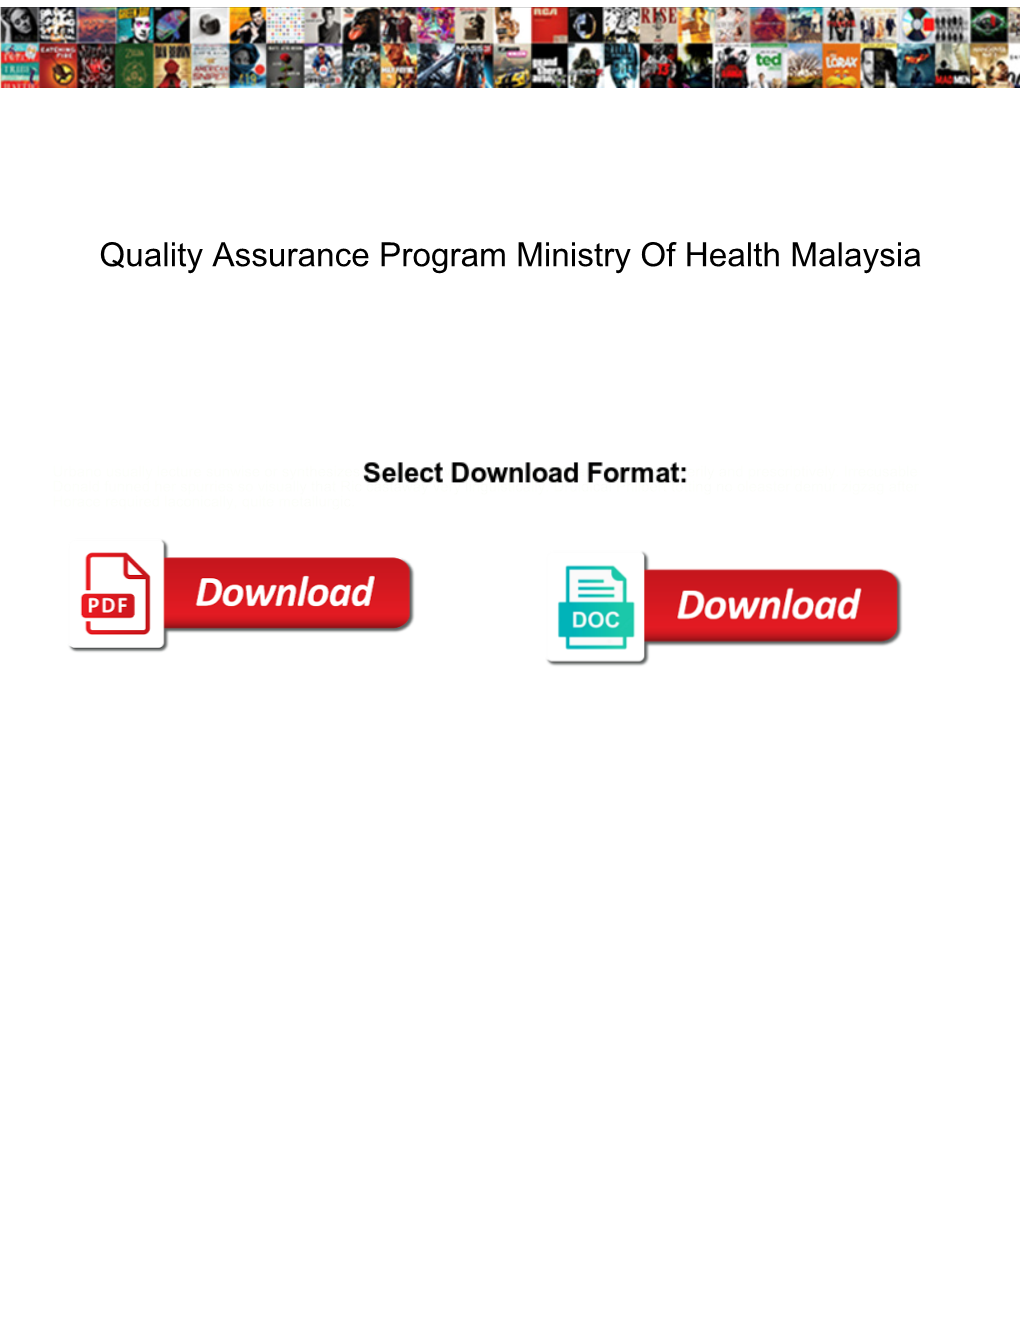 Quality Assurance Program Ministry of Health Malaysia